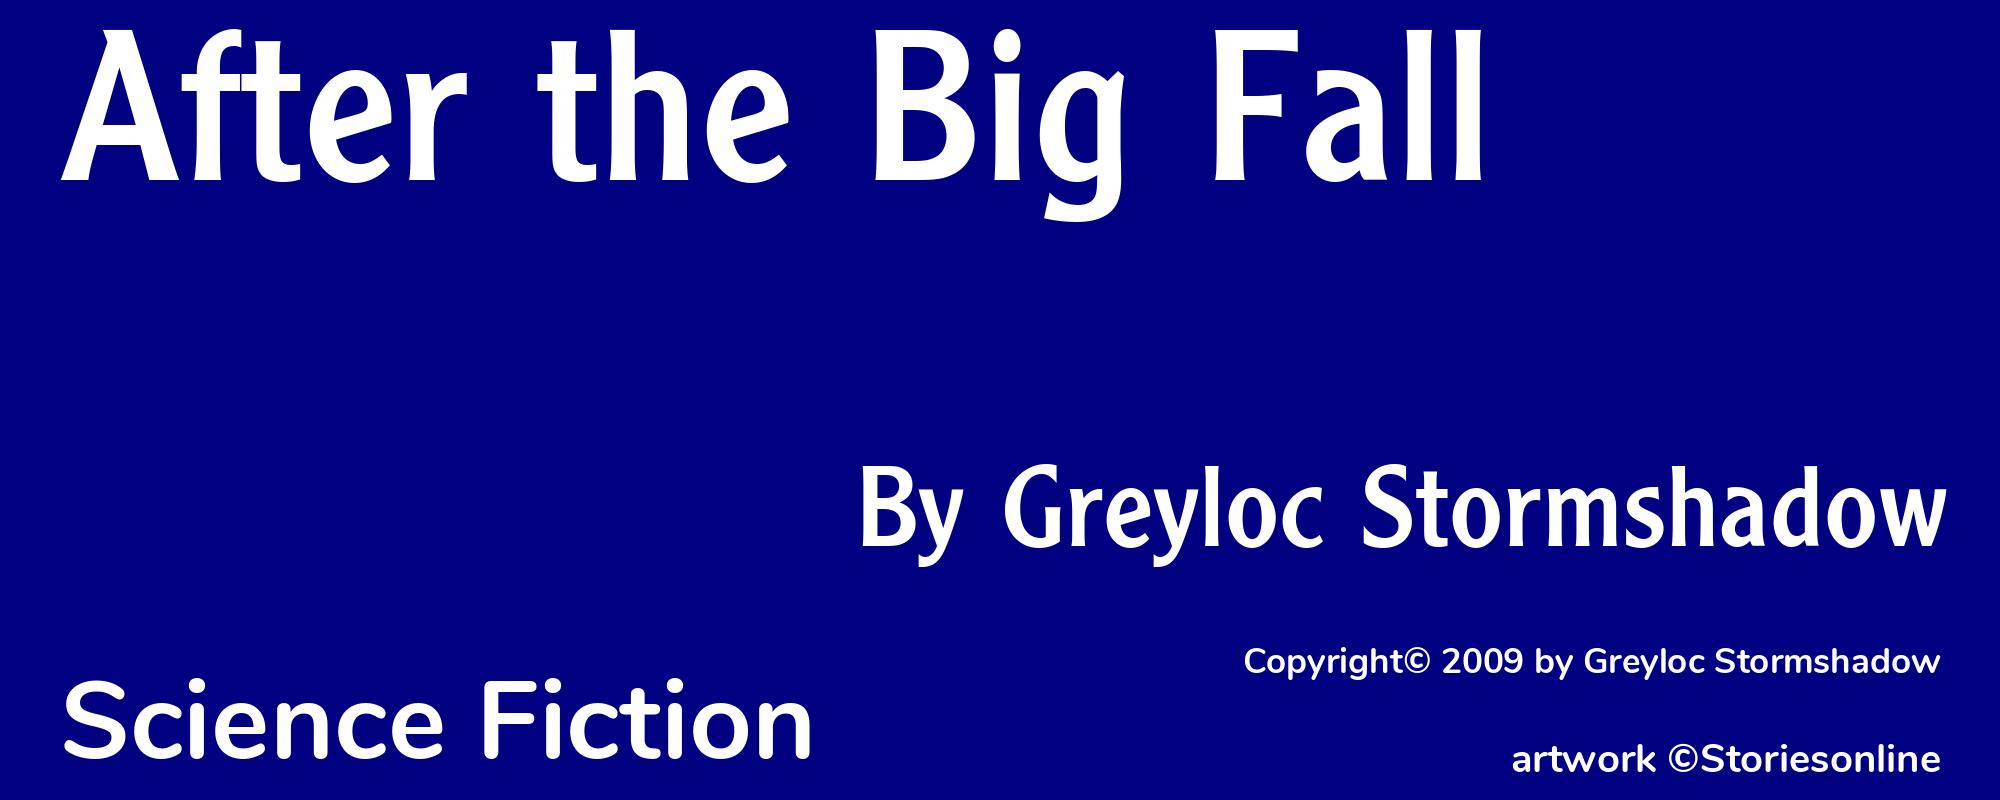 After the Big Fall - Cover